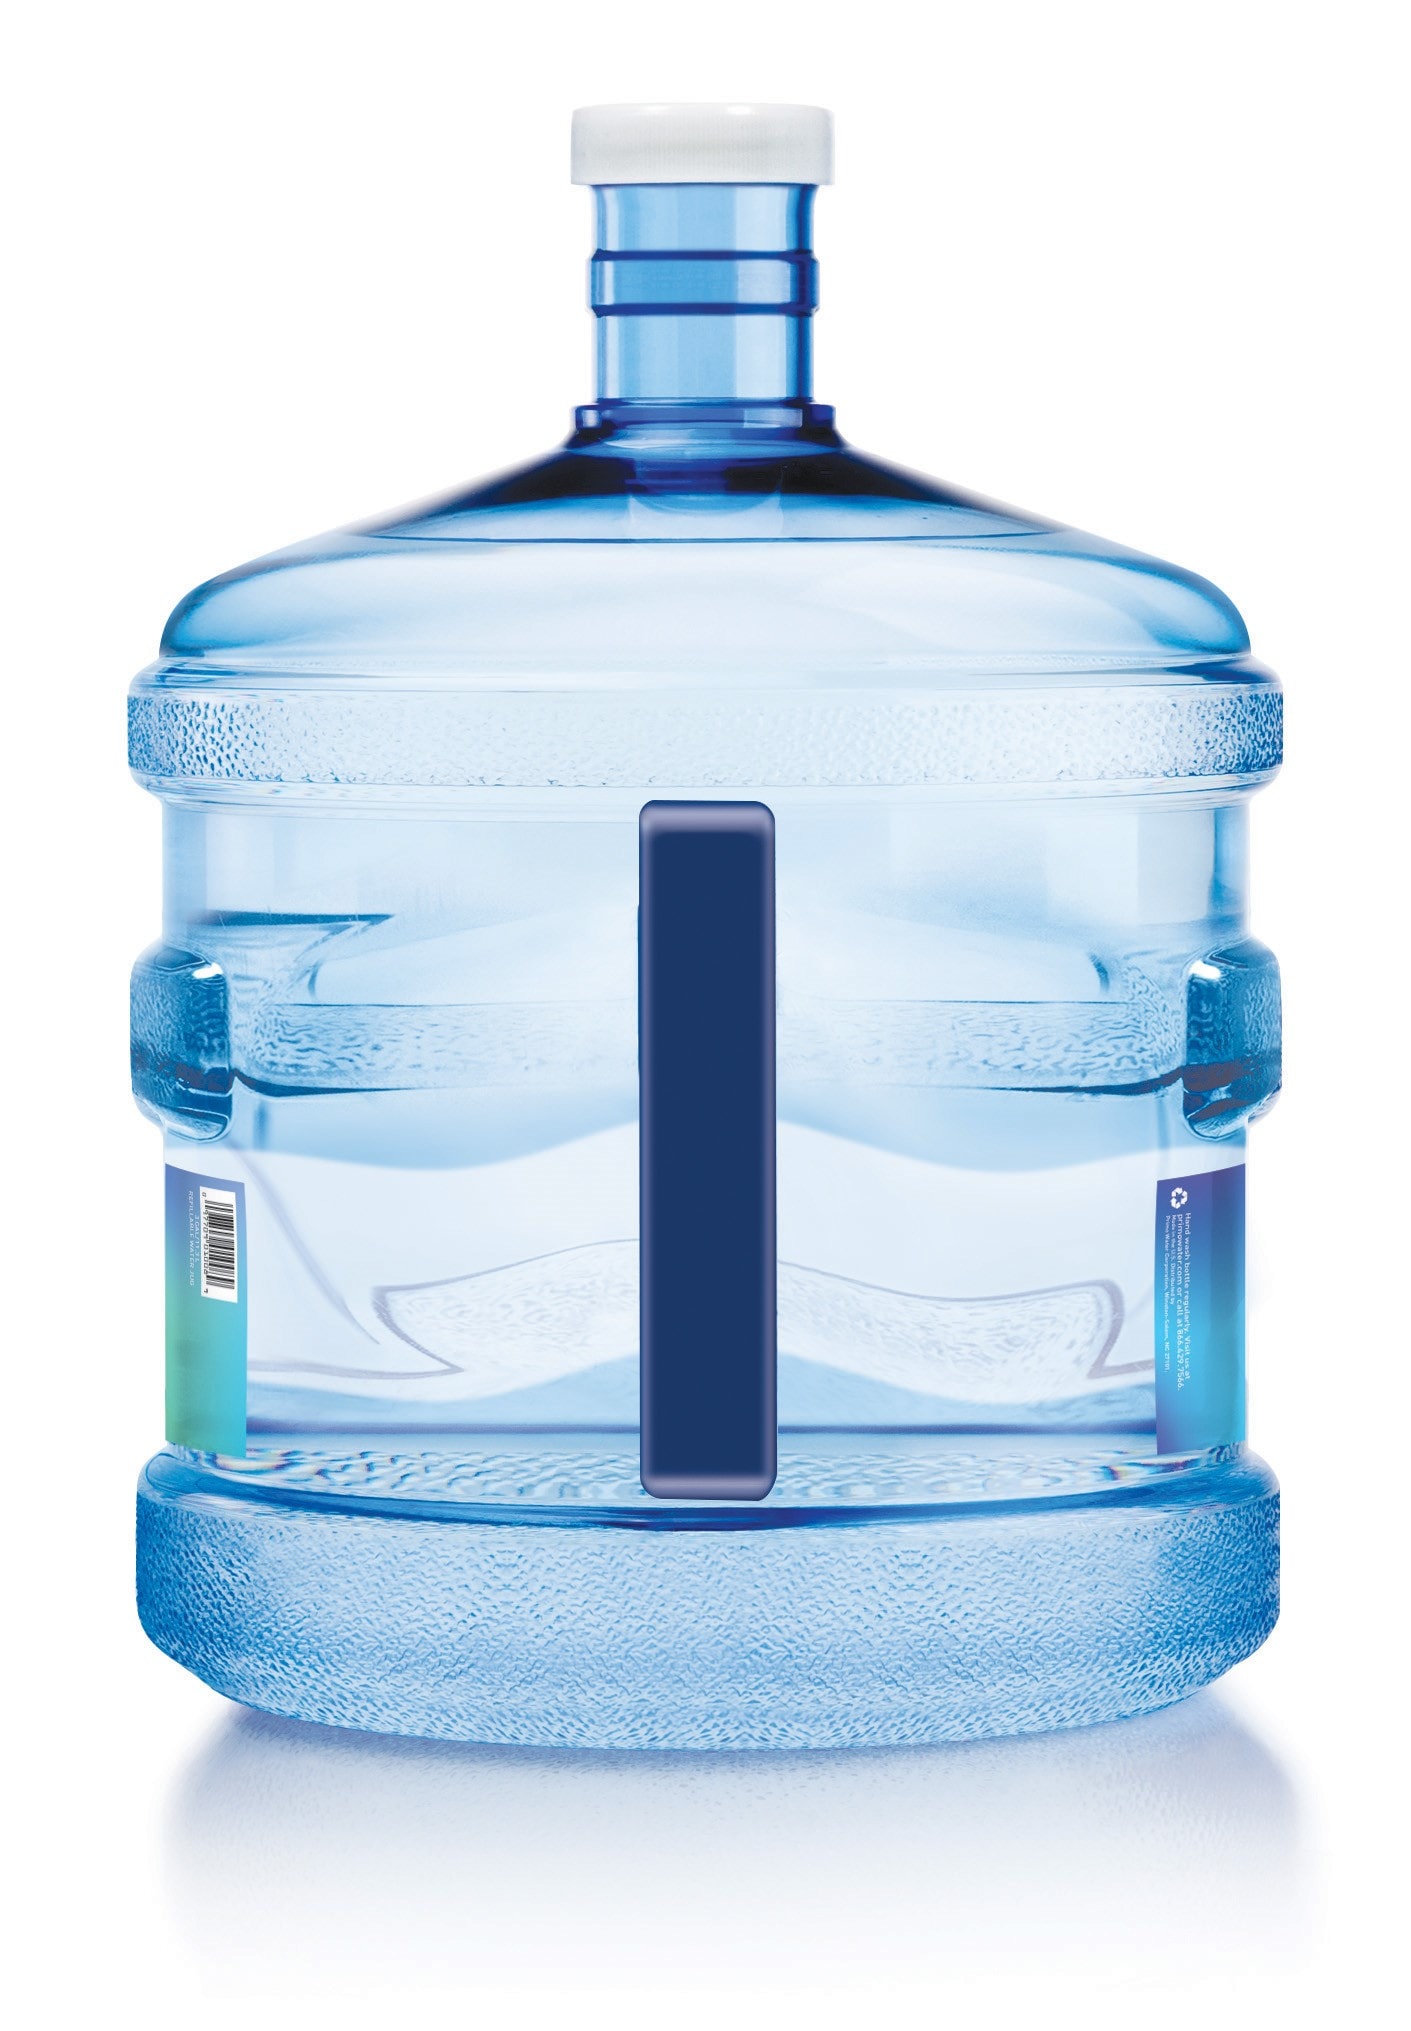 Primo 5 Gallon Bottle With Water - 5 GA - Albertsons